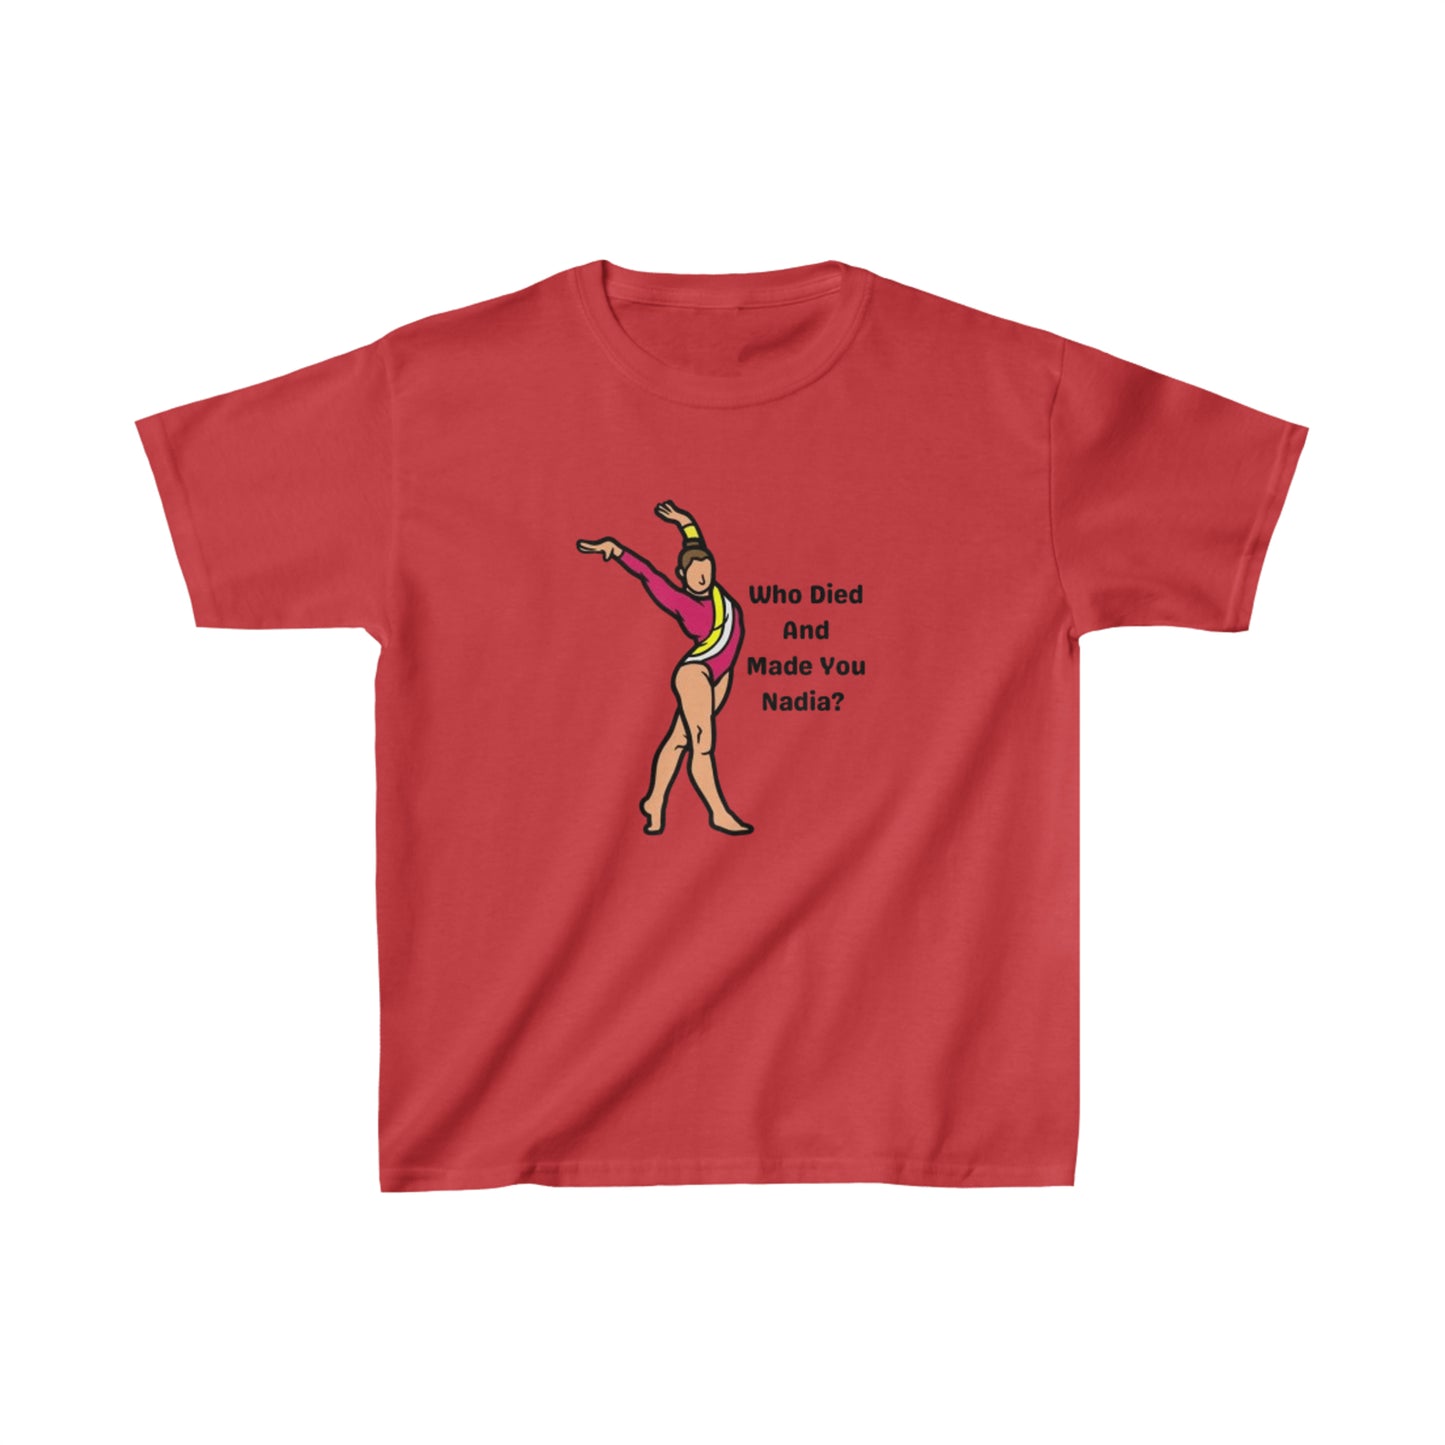 Who died and made you Nadia - Kids Heavy Cotton™ Tee